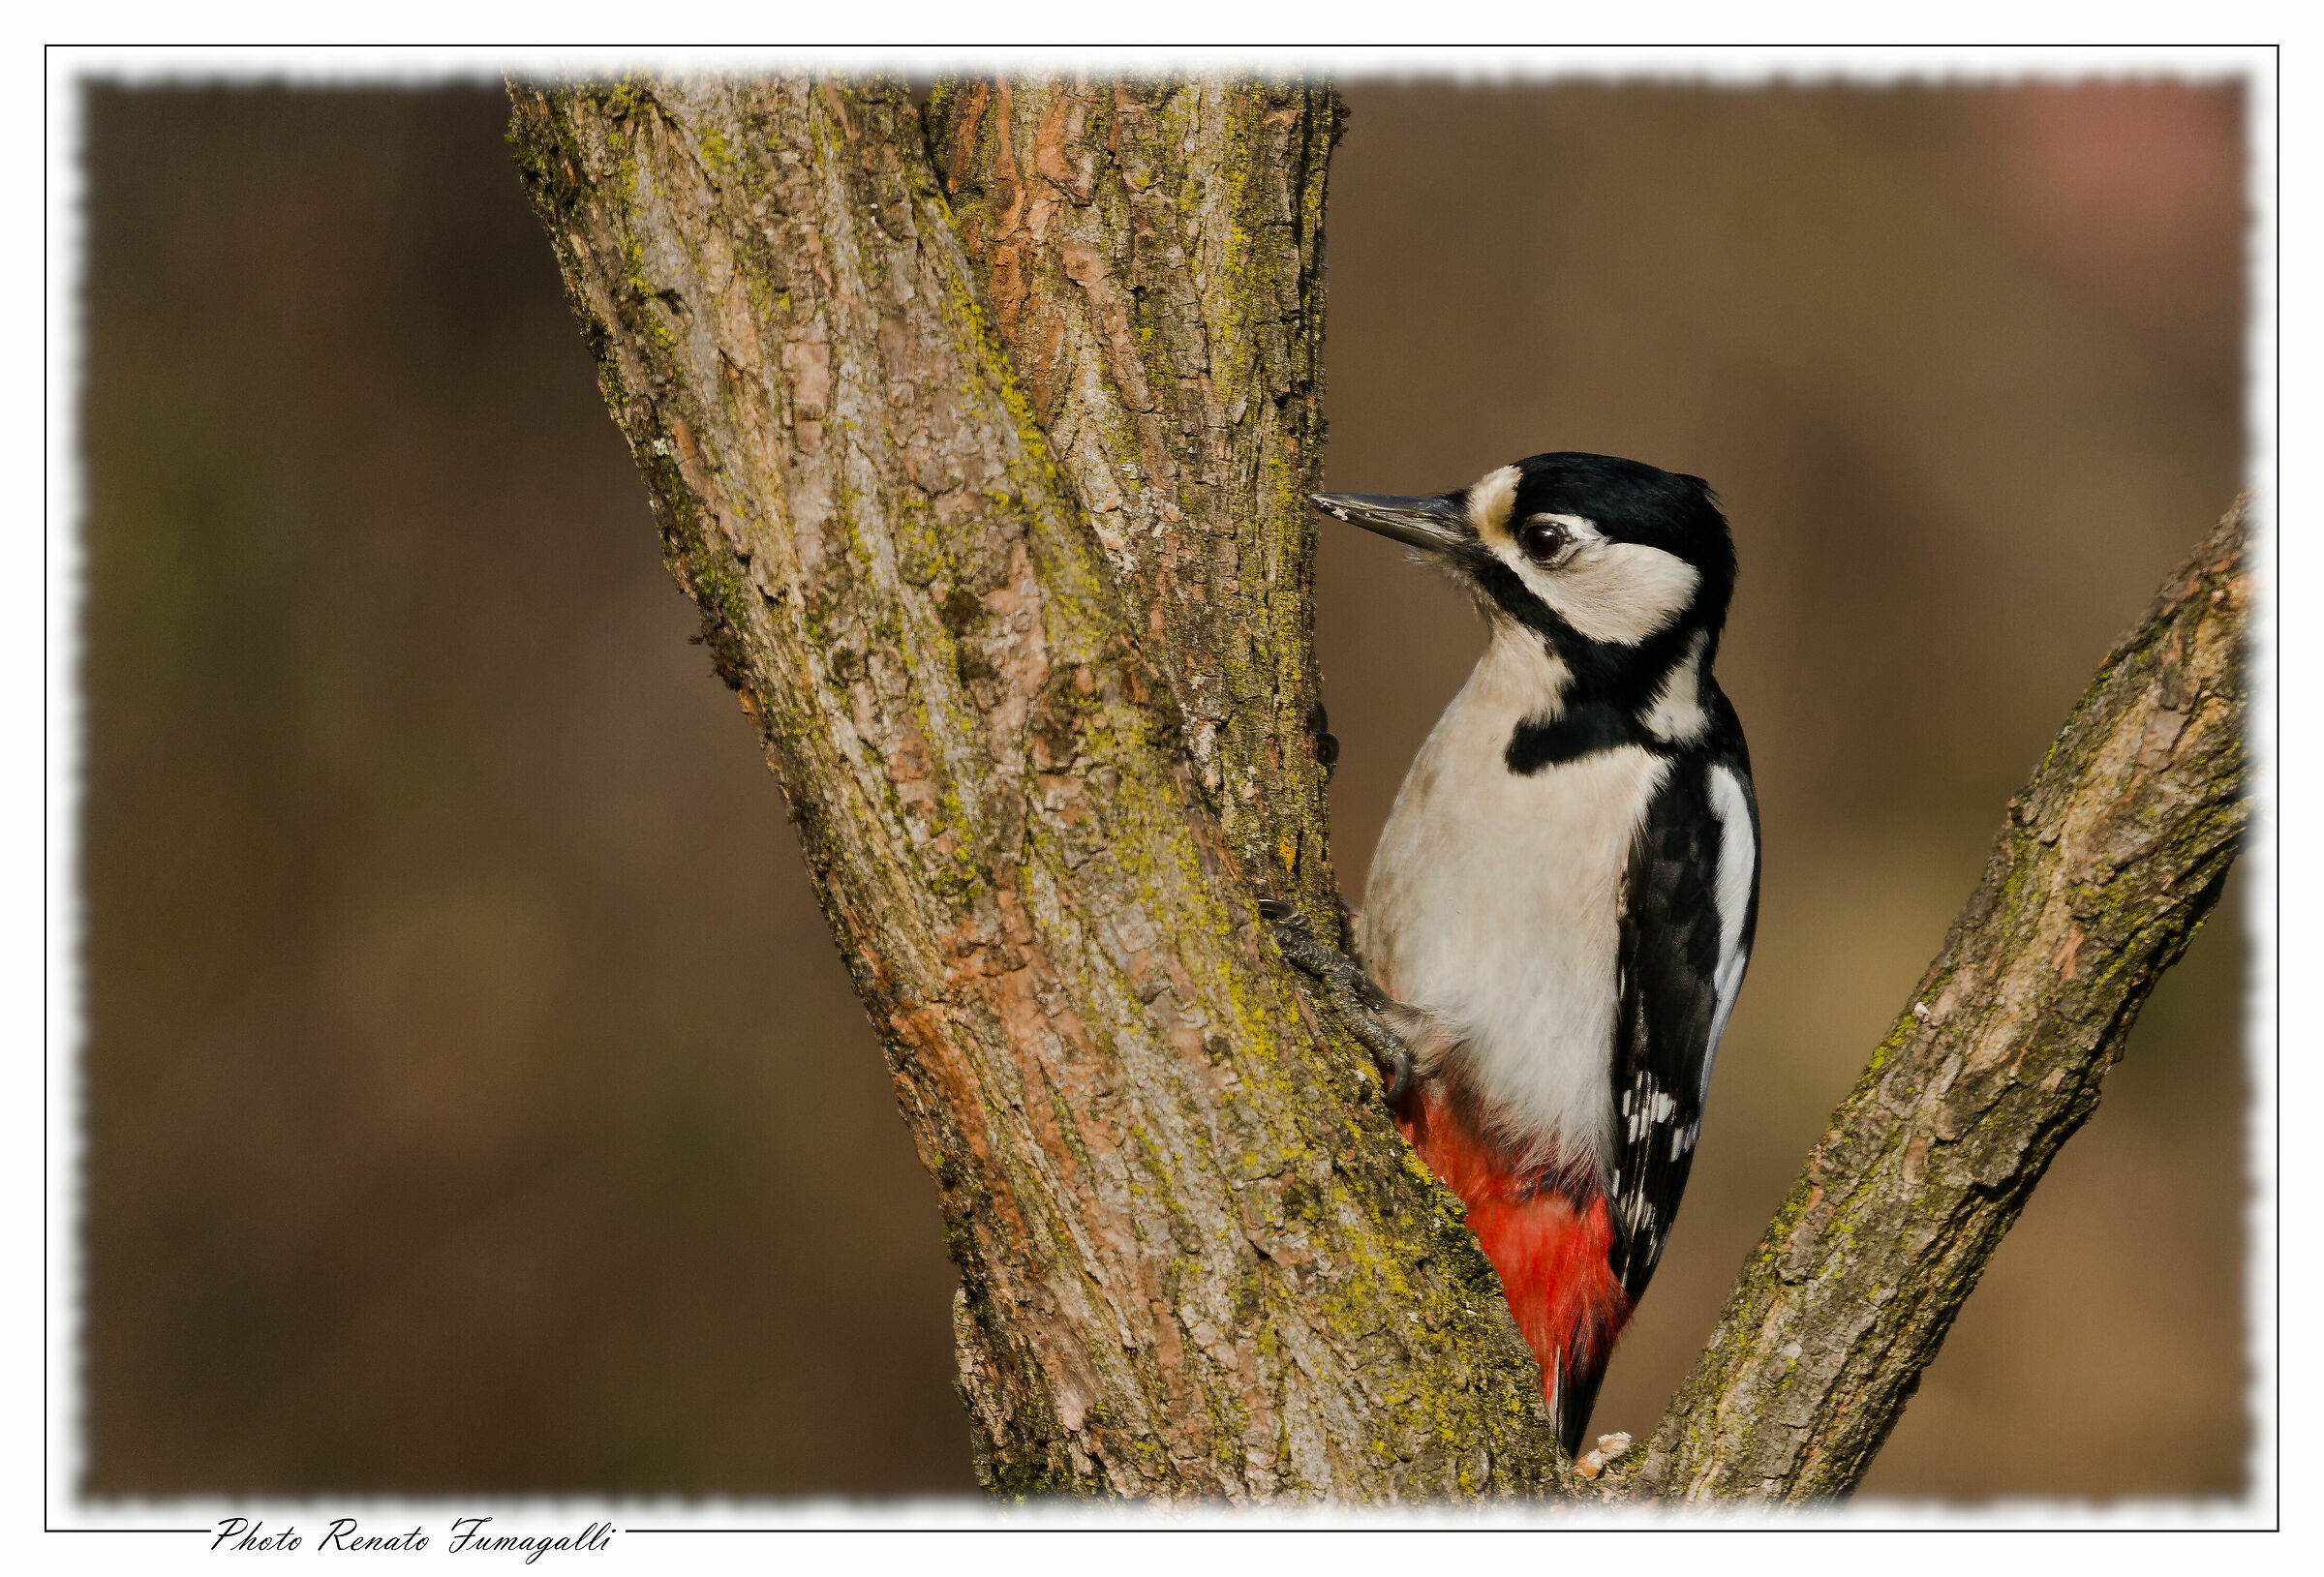 Female Great Spotted Woodpecker (Dendrocopos major)...